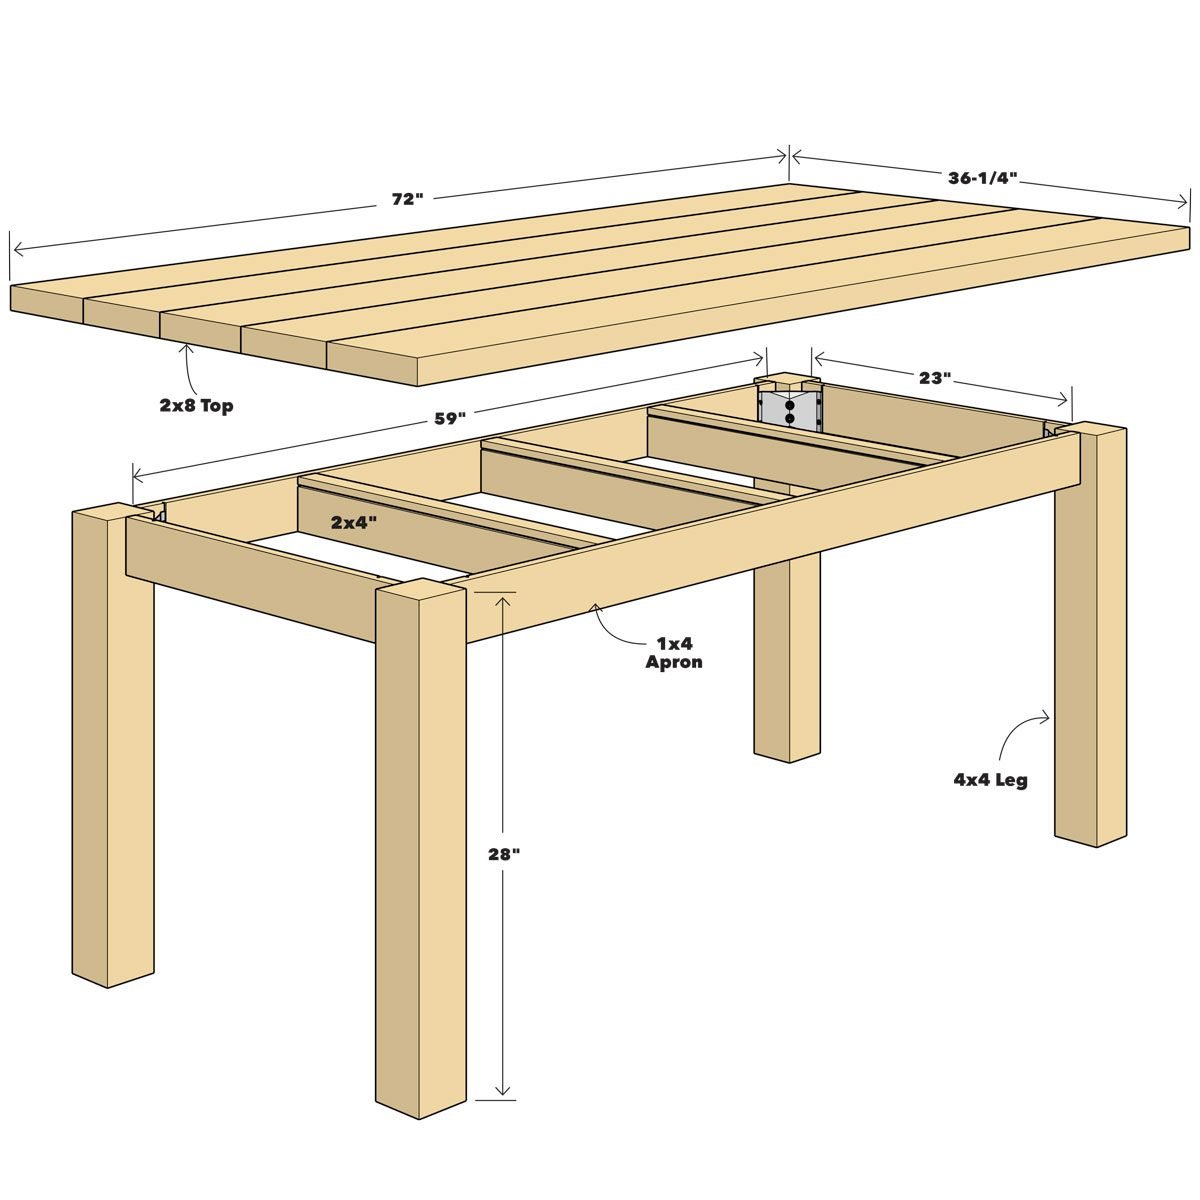 Woodworking table build Main Image